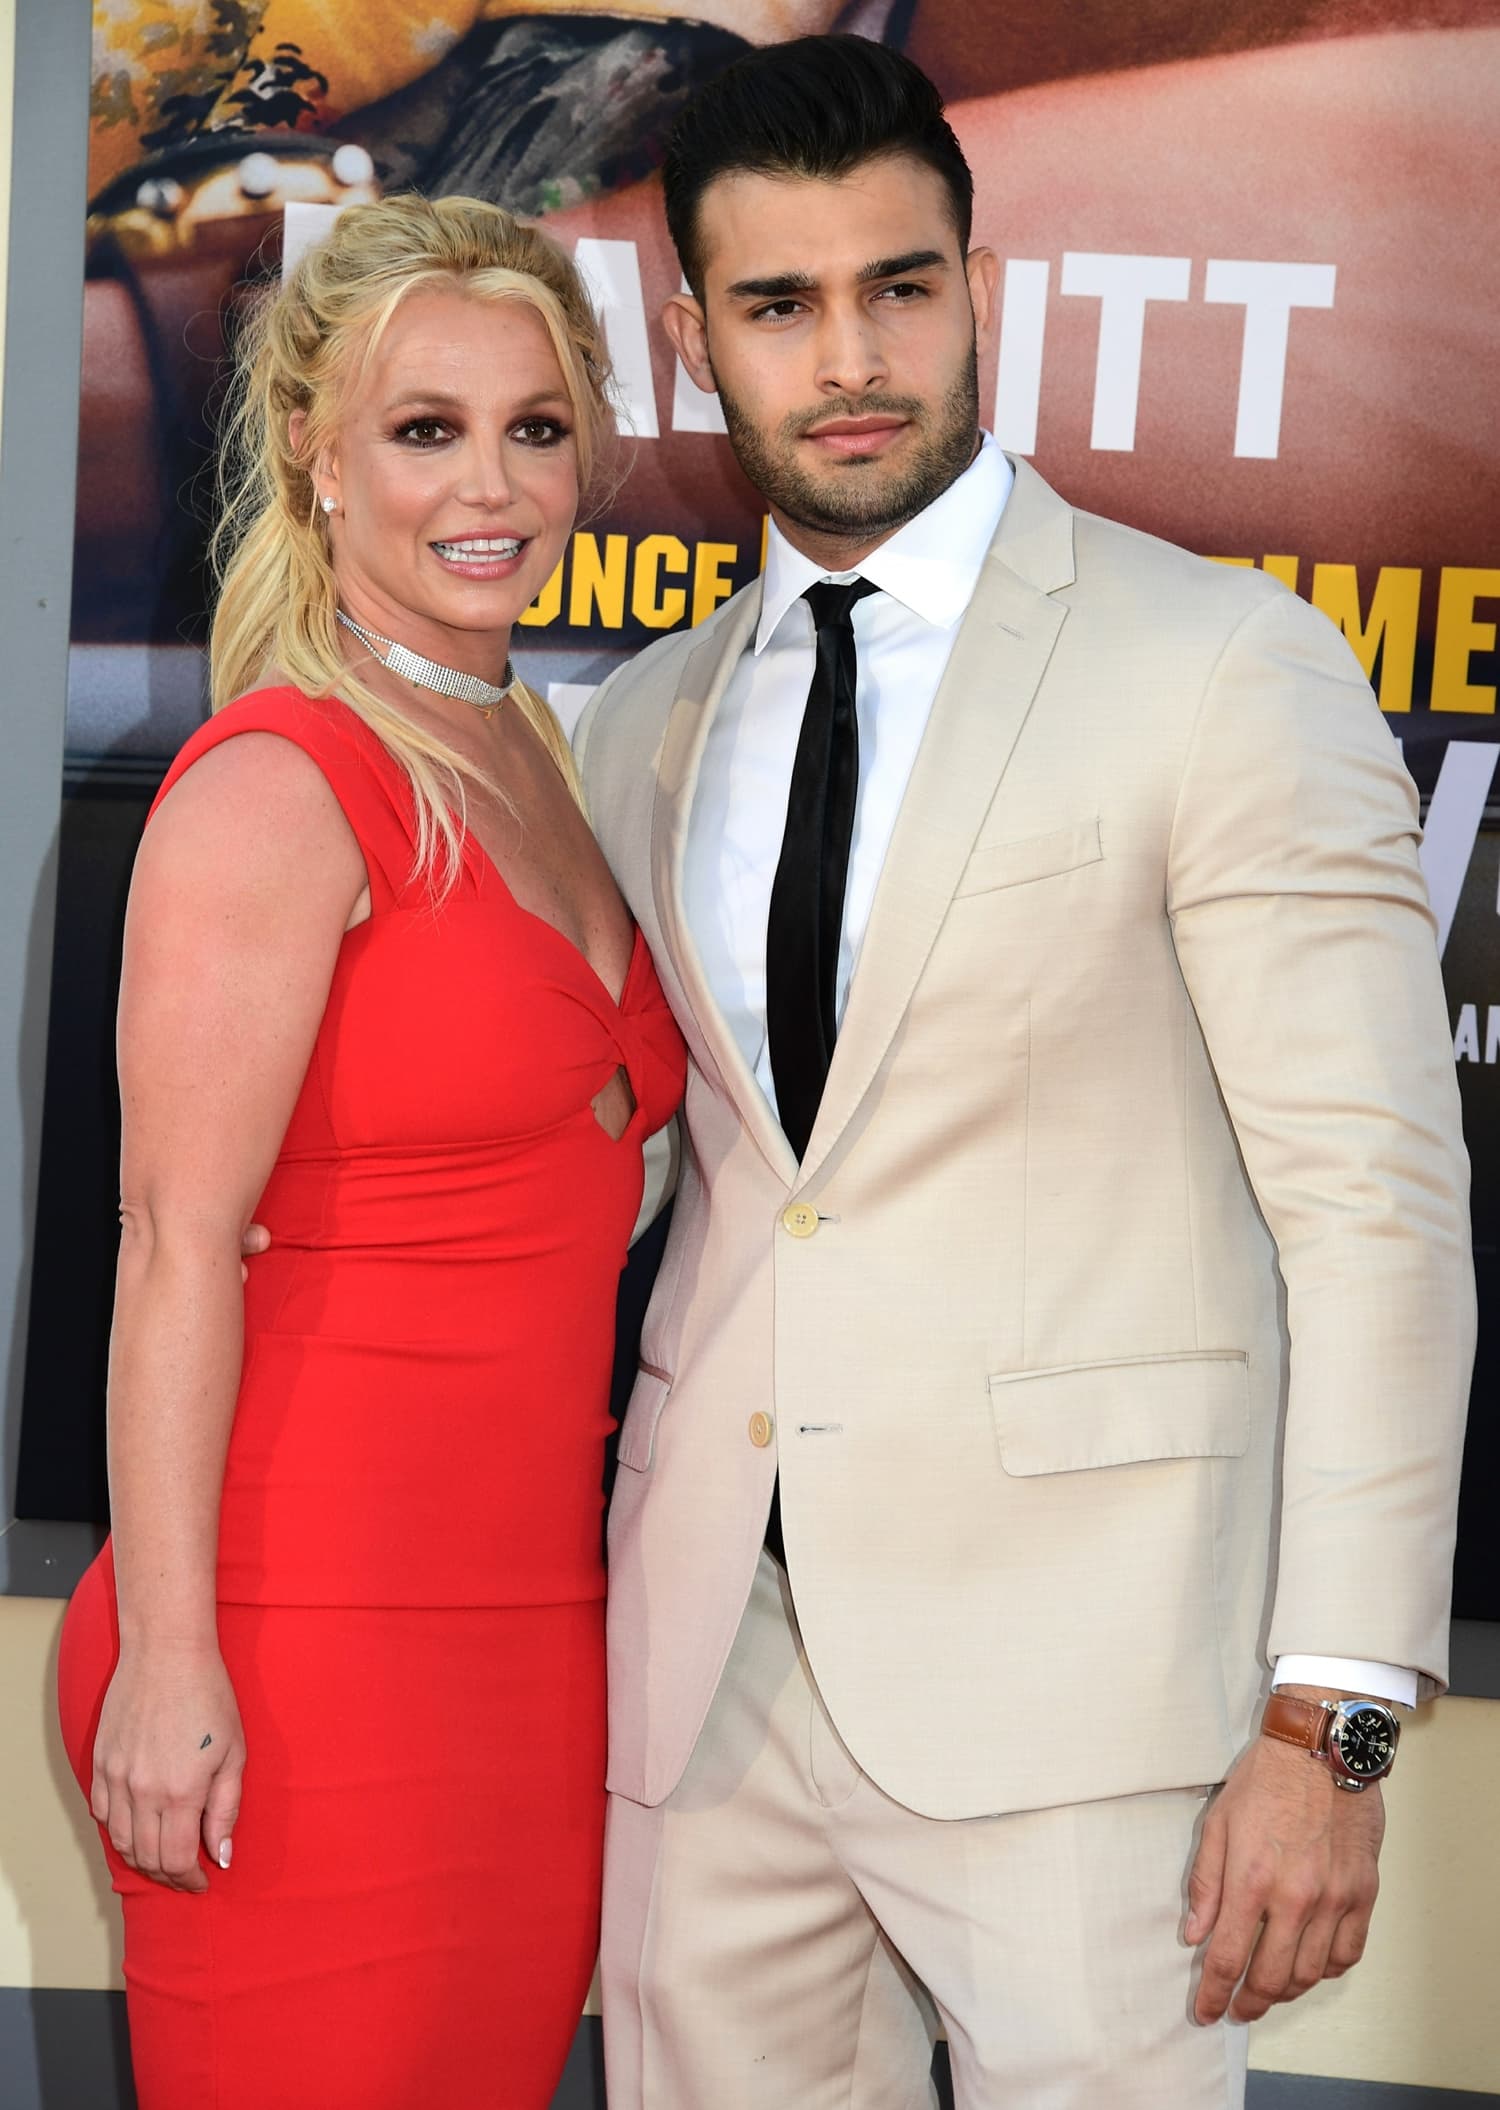 Britney Spears and Sam Asghari met in October 2016 on the set of her “Slumber Party” music video and are reportedly planning to get married in 2022